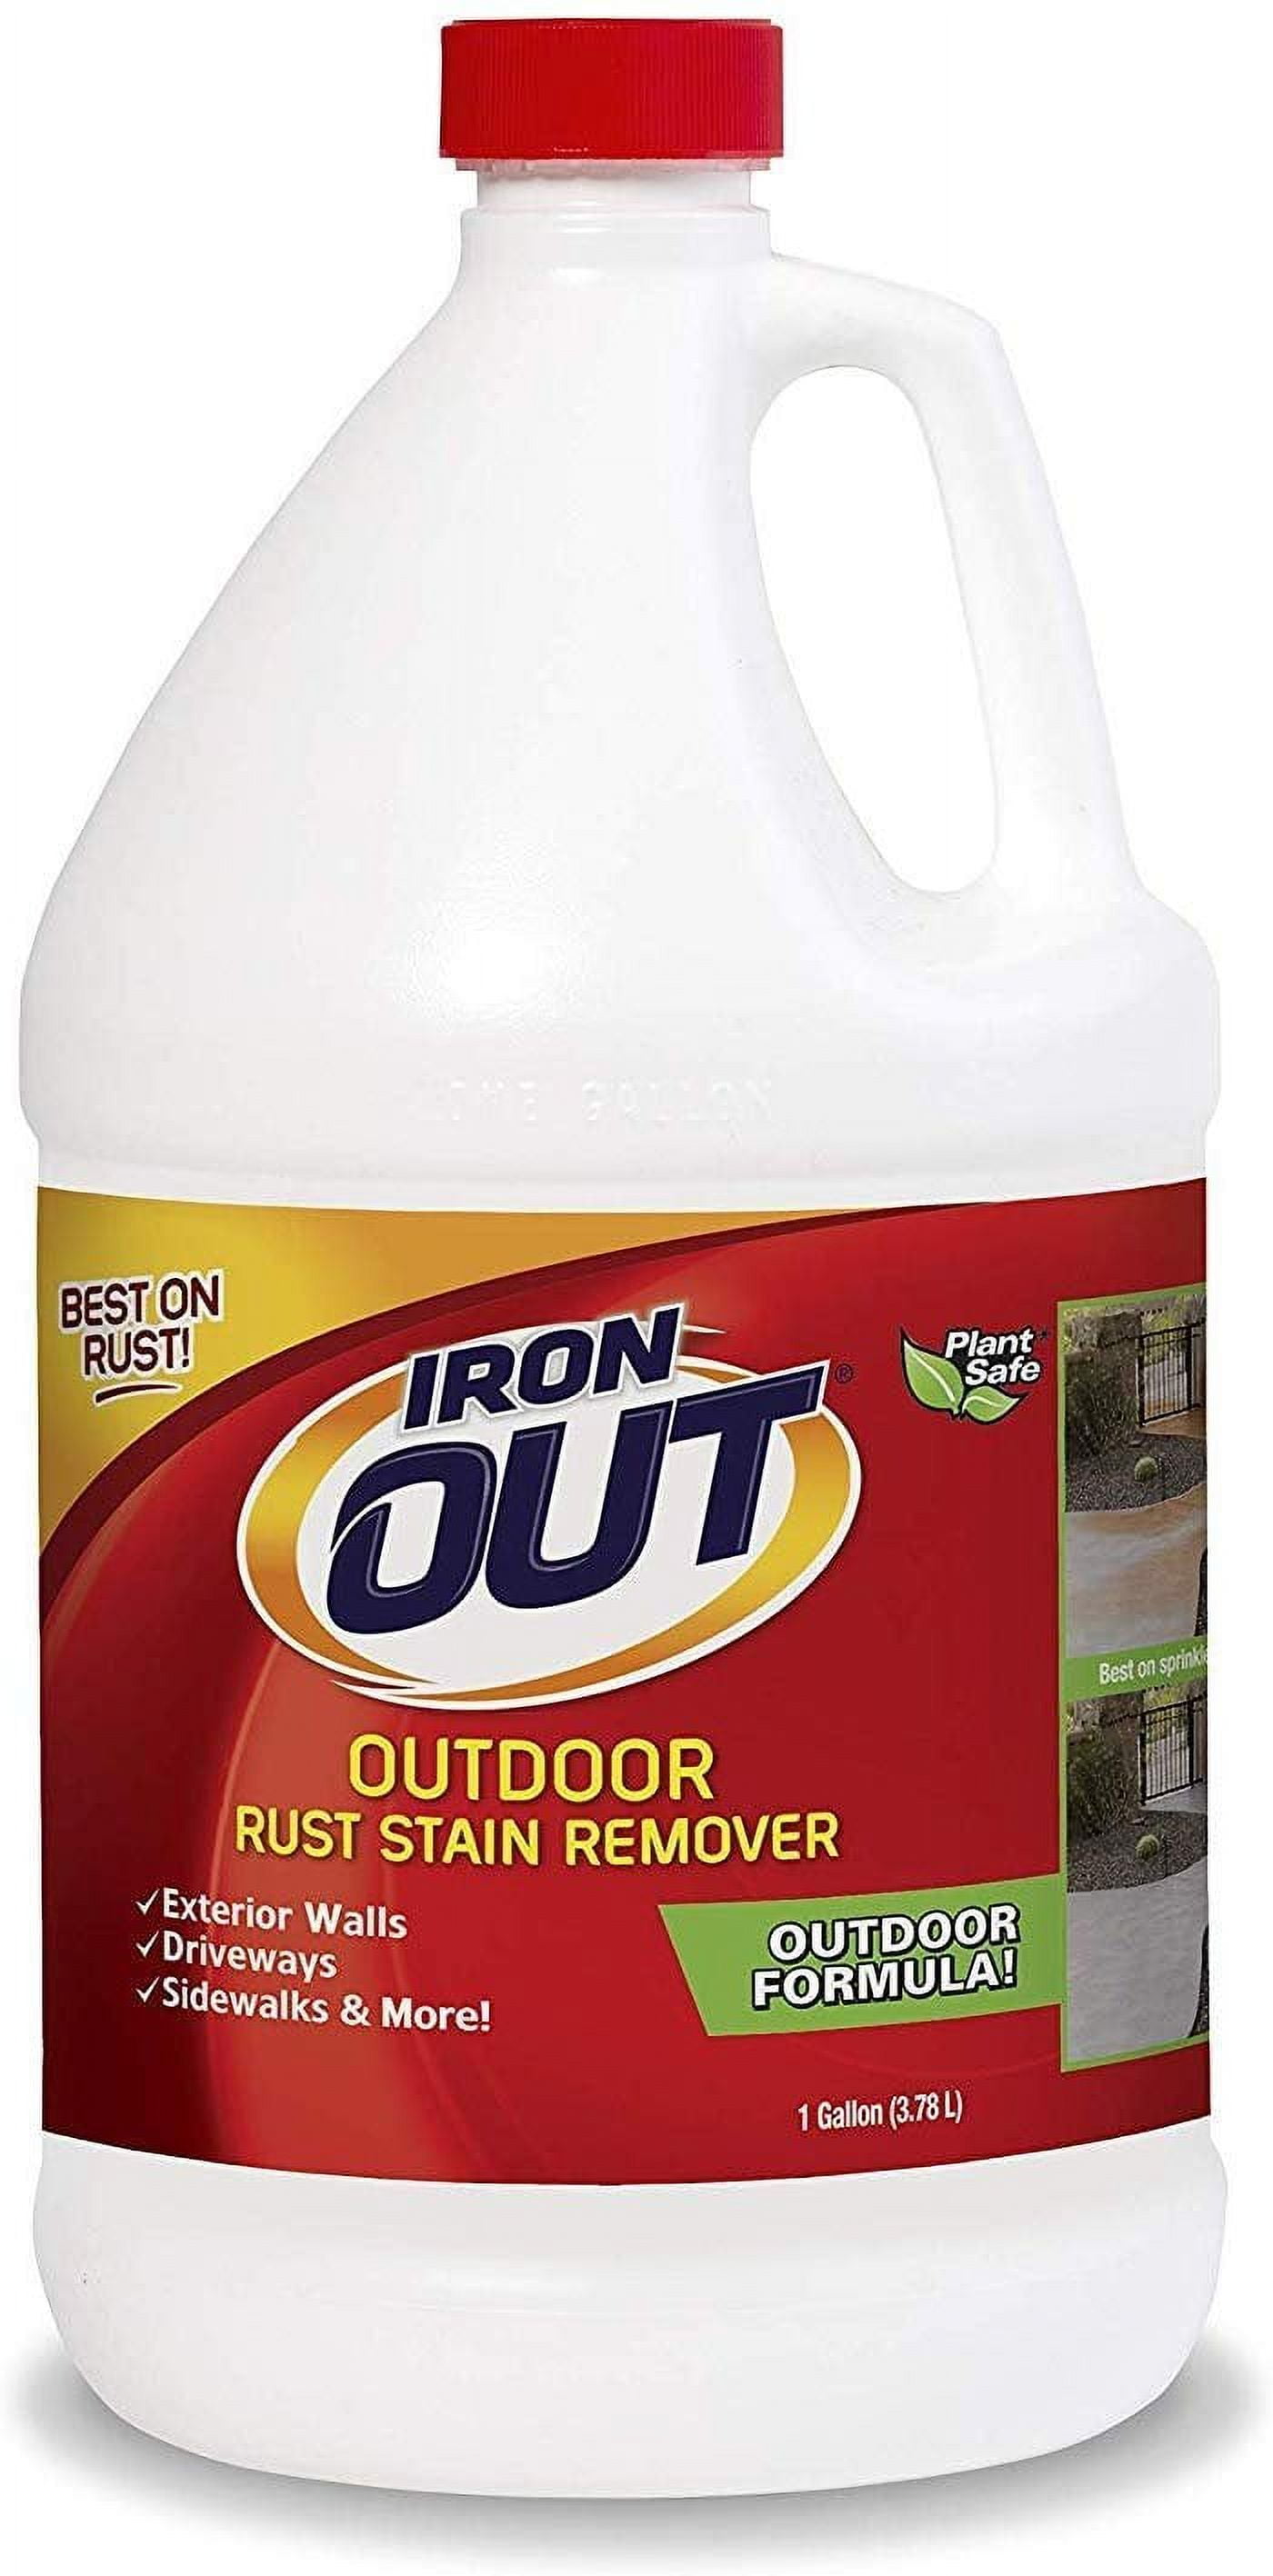 Arnor Rust Remover for Removing Concrete Rust Stains